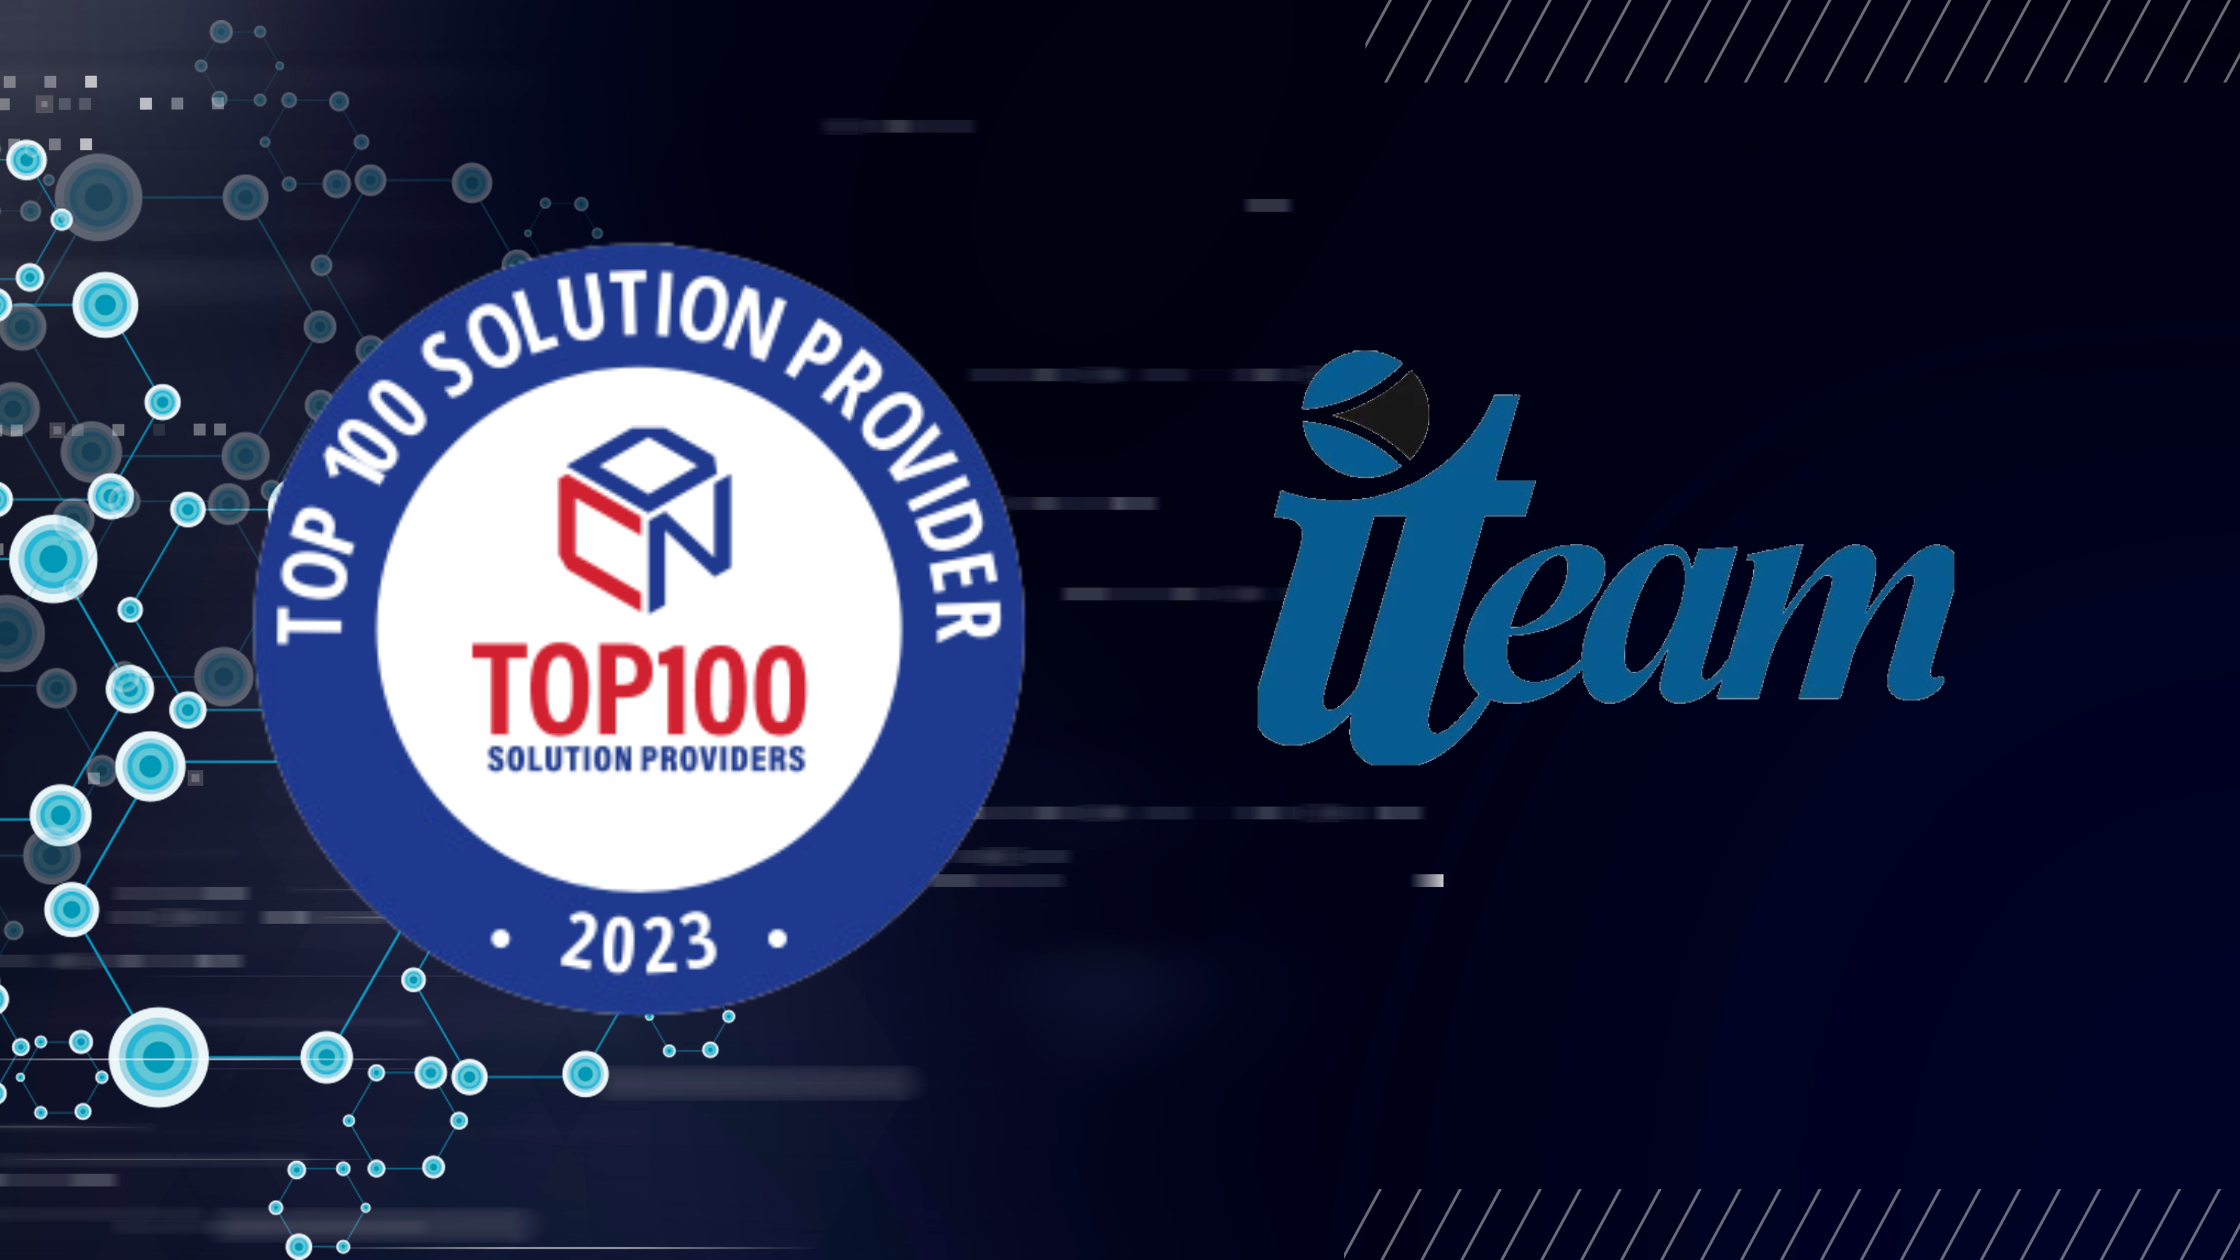 The ITeam announces CDN Top 100 Solutions Provider Ranking